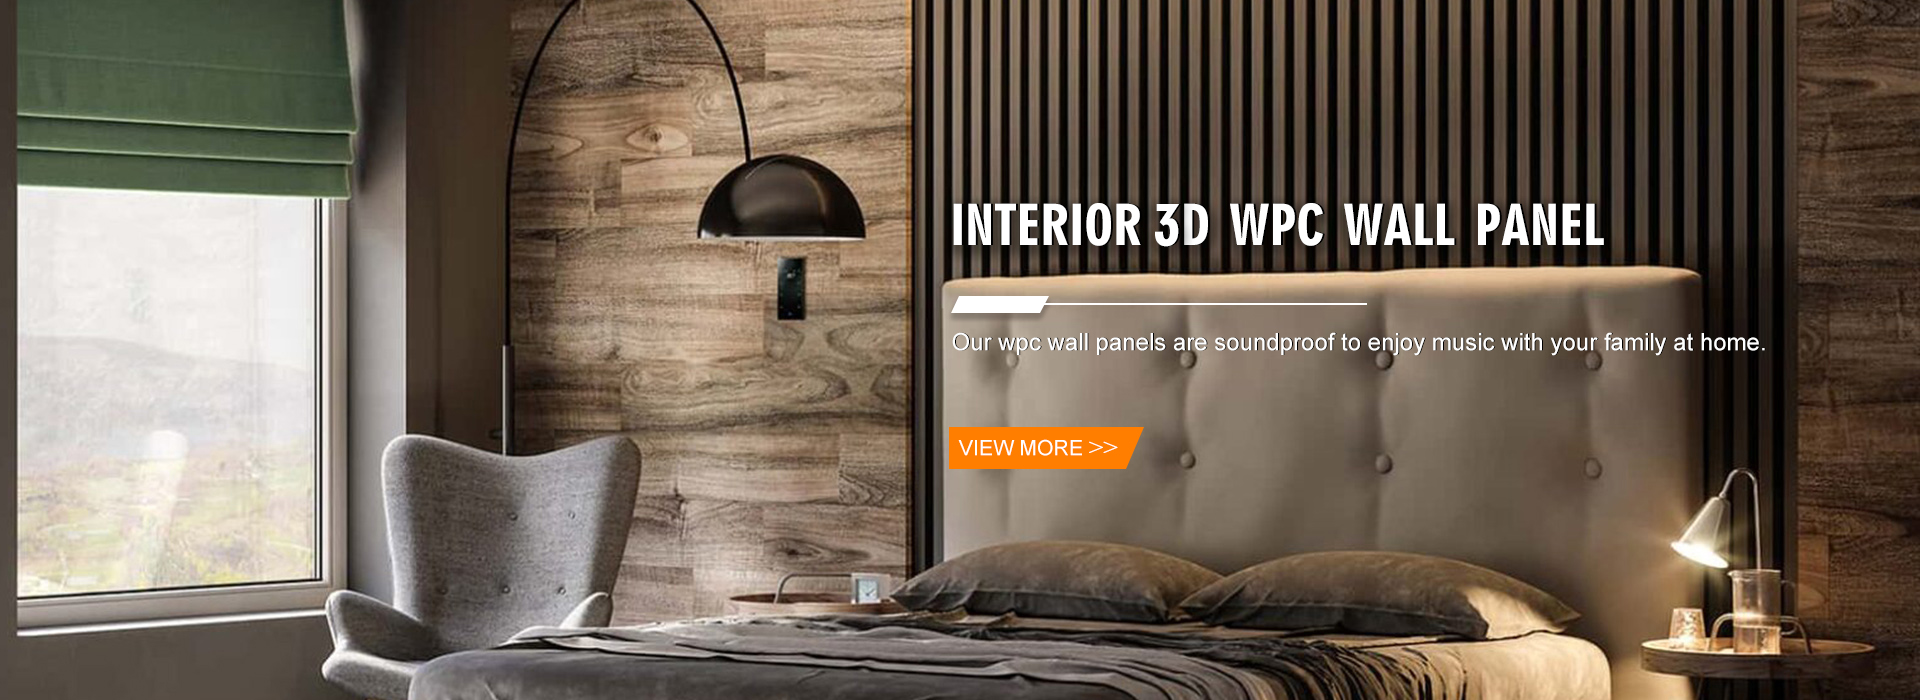 Interior 3D WPC Wall Panel